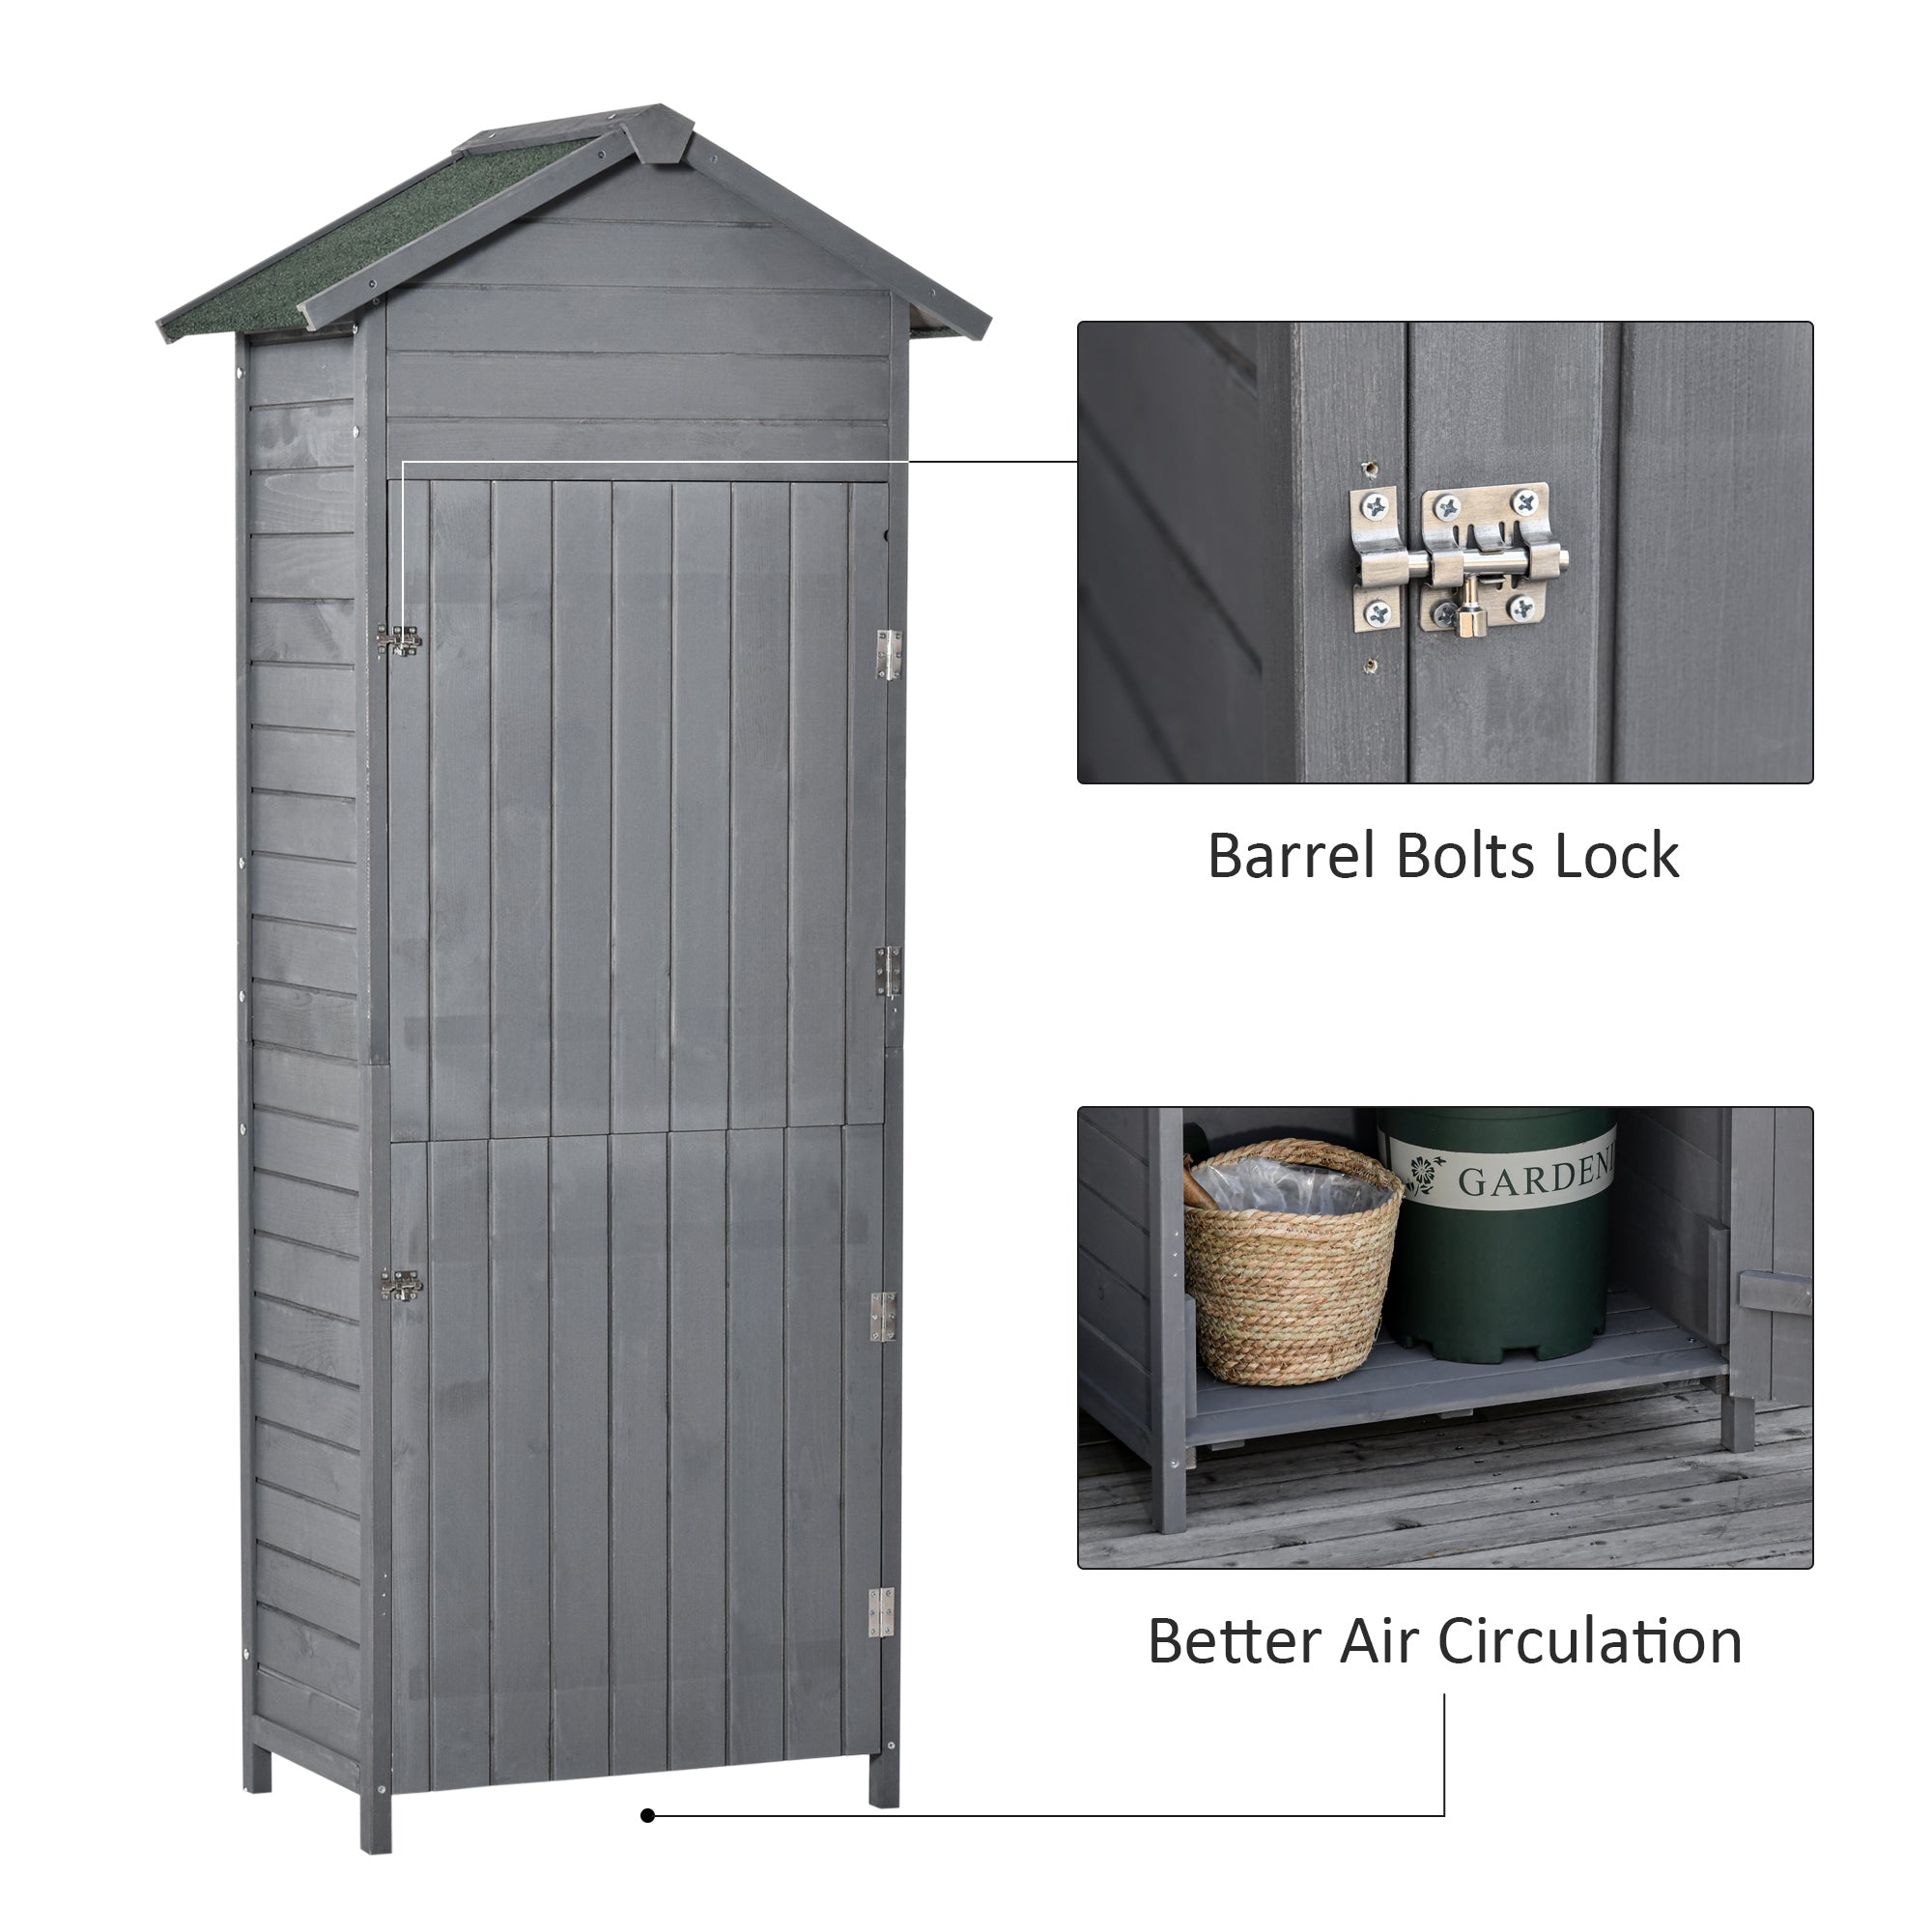 Outsunny Wooden Garden Storage Shed Timber Tool Cabinet Organiser w/ Tilted-felt Roof, Shelves, Lockable Doors, 189 x 82 x 49 cm, Grey - Inspirely